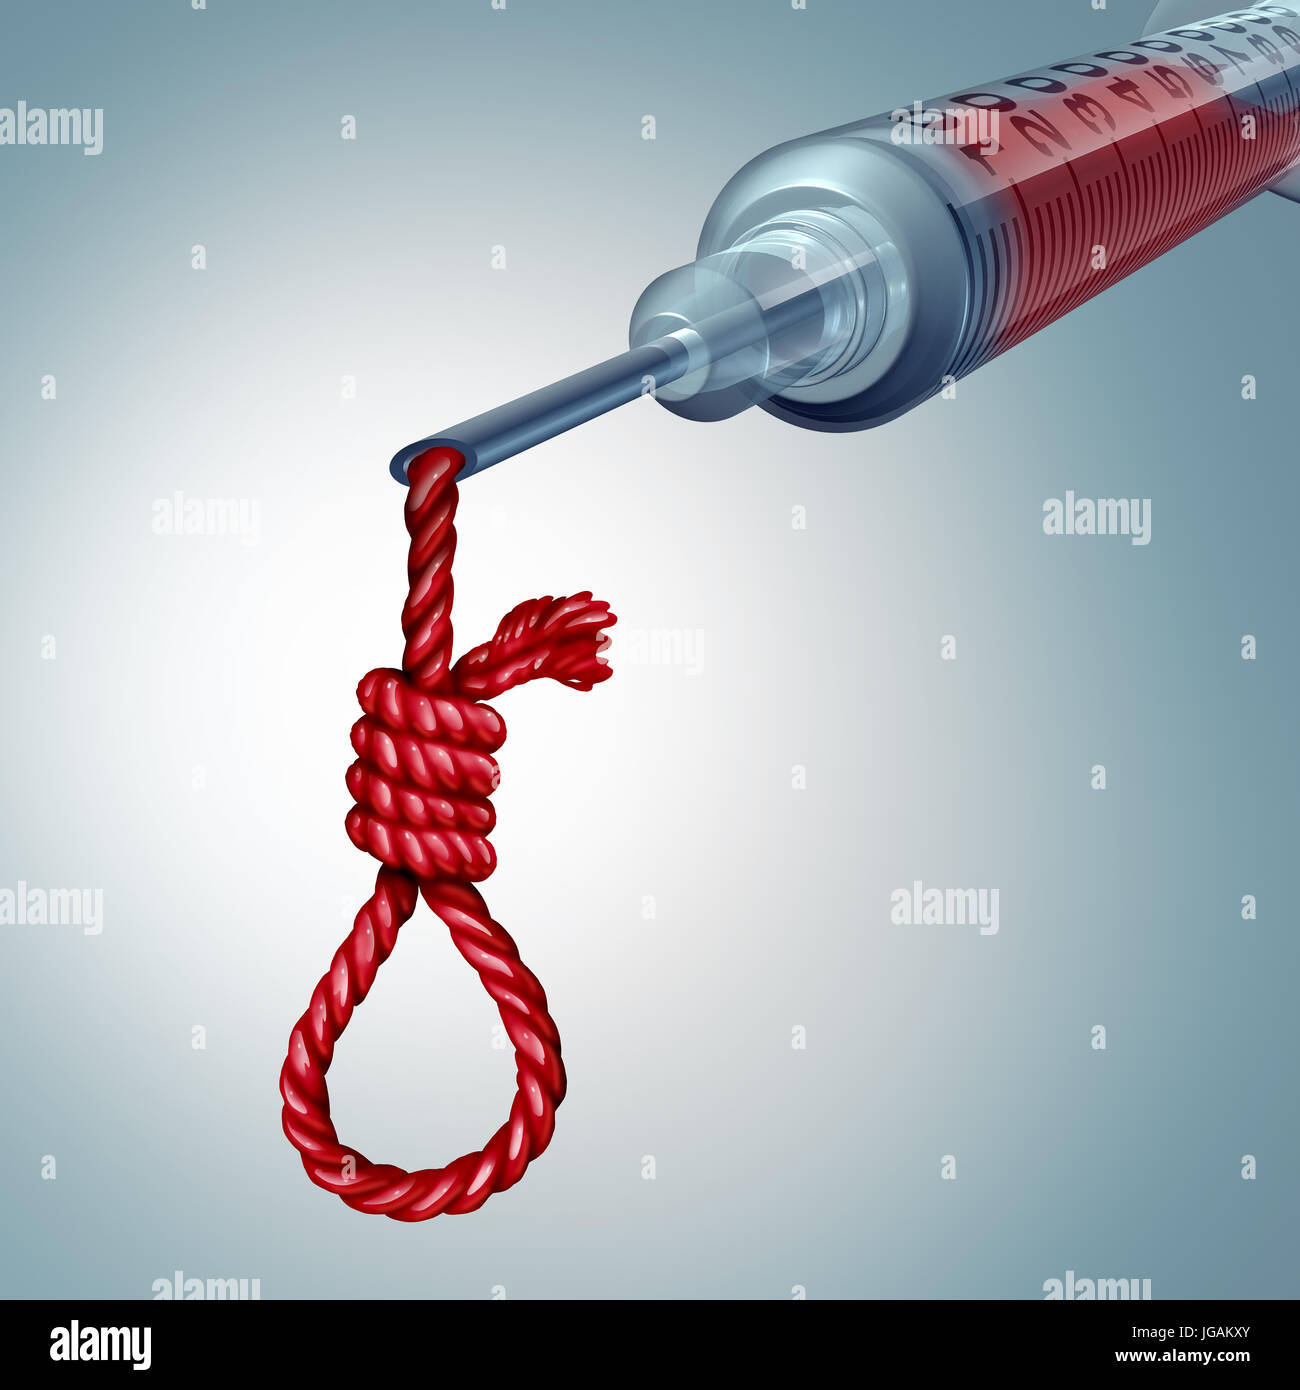 Health care danger and medical risk concept as a hospital syringe dripping blood shaped as a noose knot as a medicine. Stock Photo